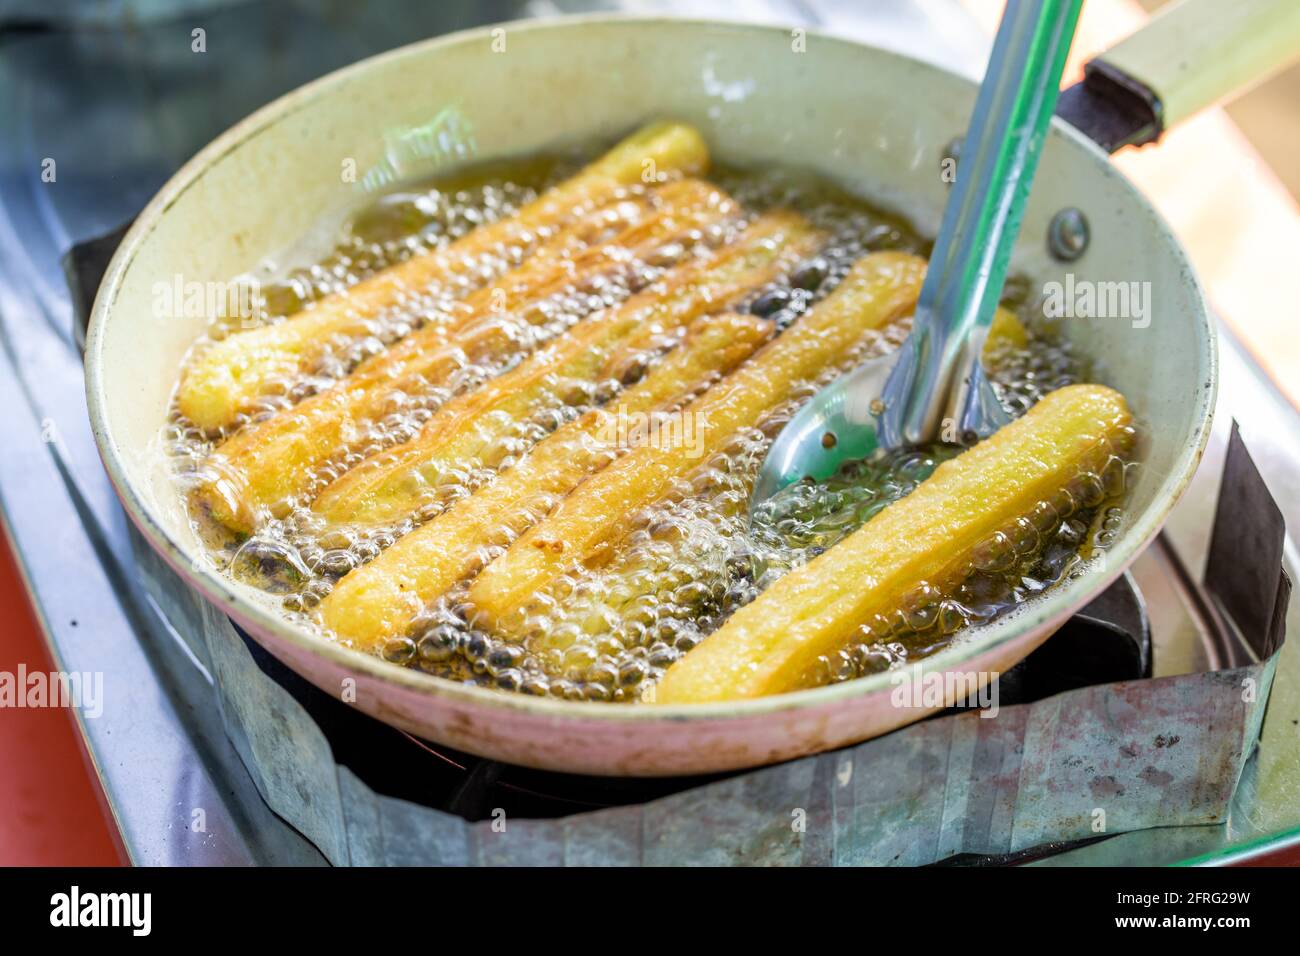 Churros are fried in a flat pan. Stock Photo